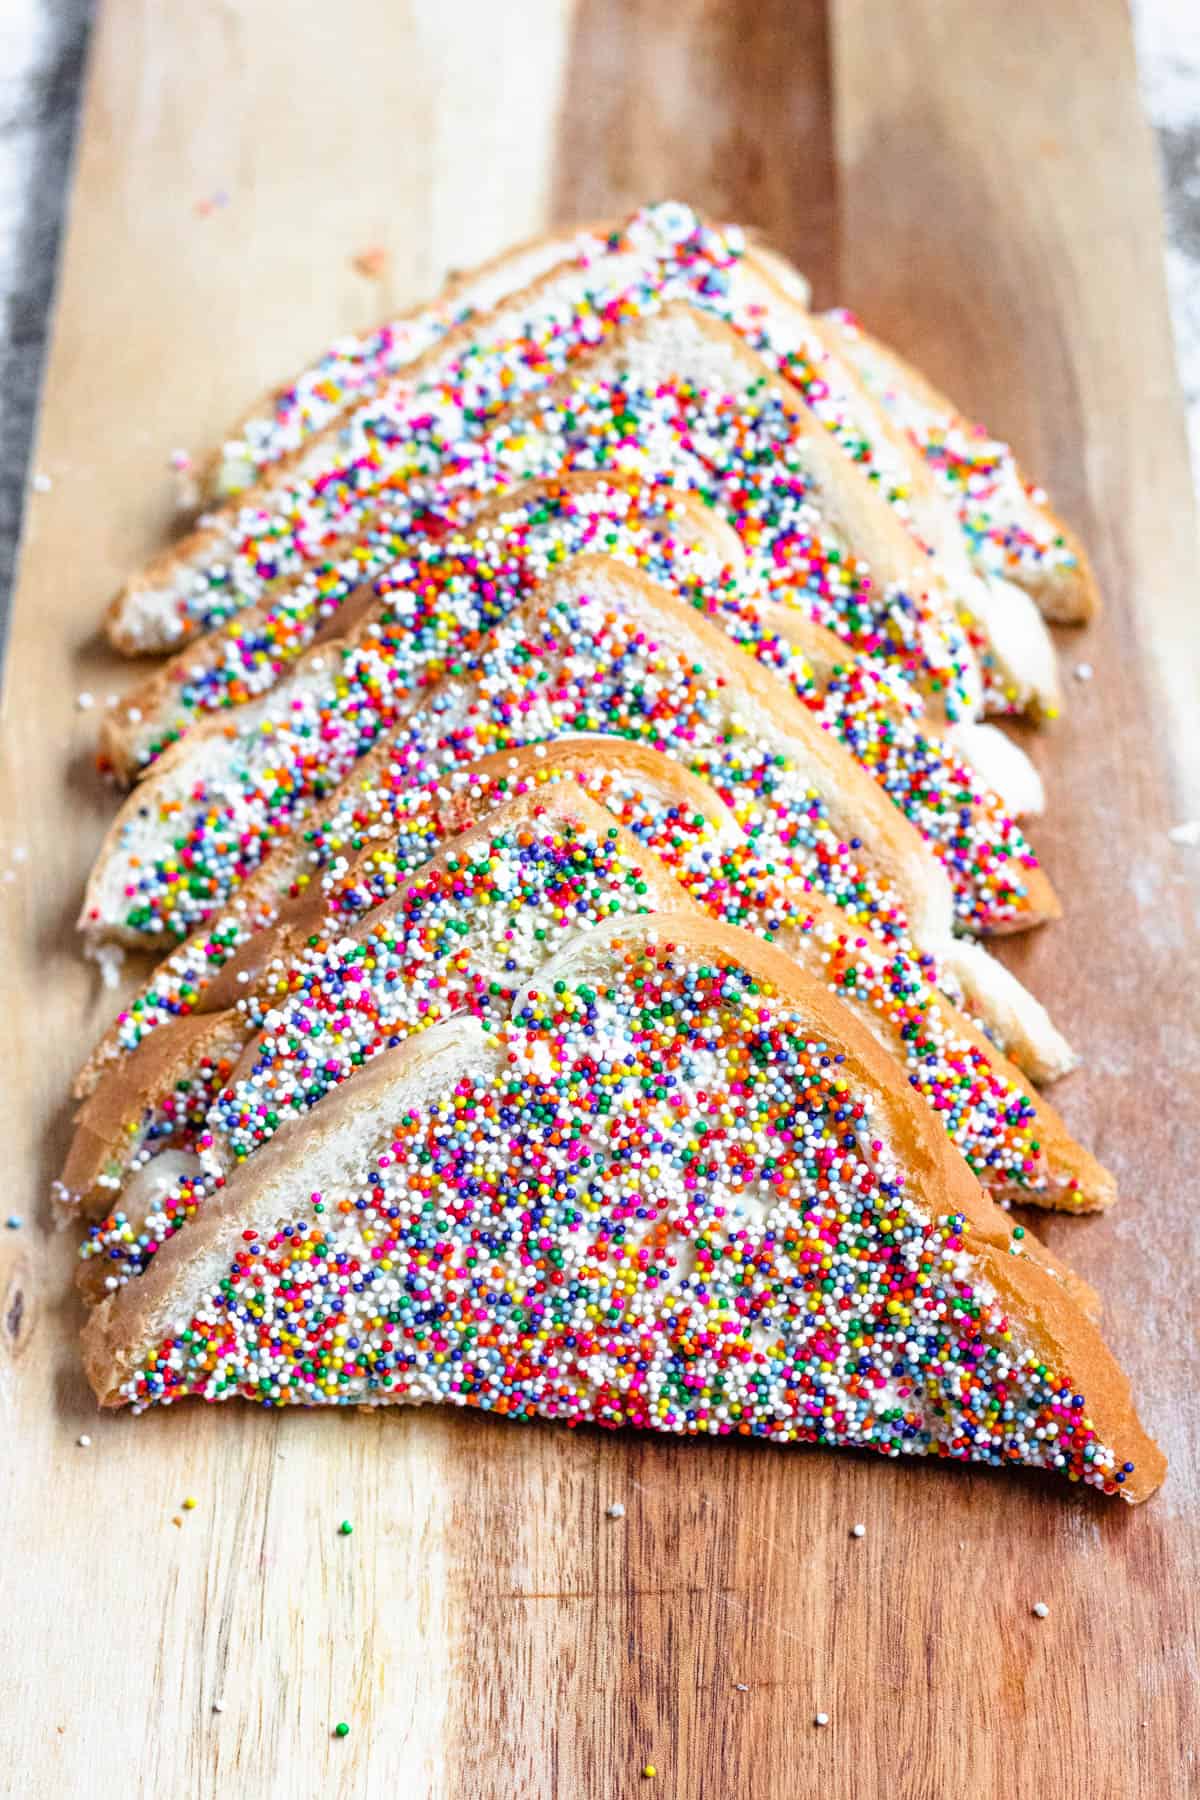 Fairy bread slices lined up